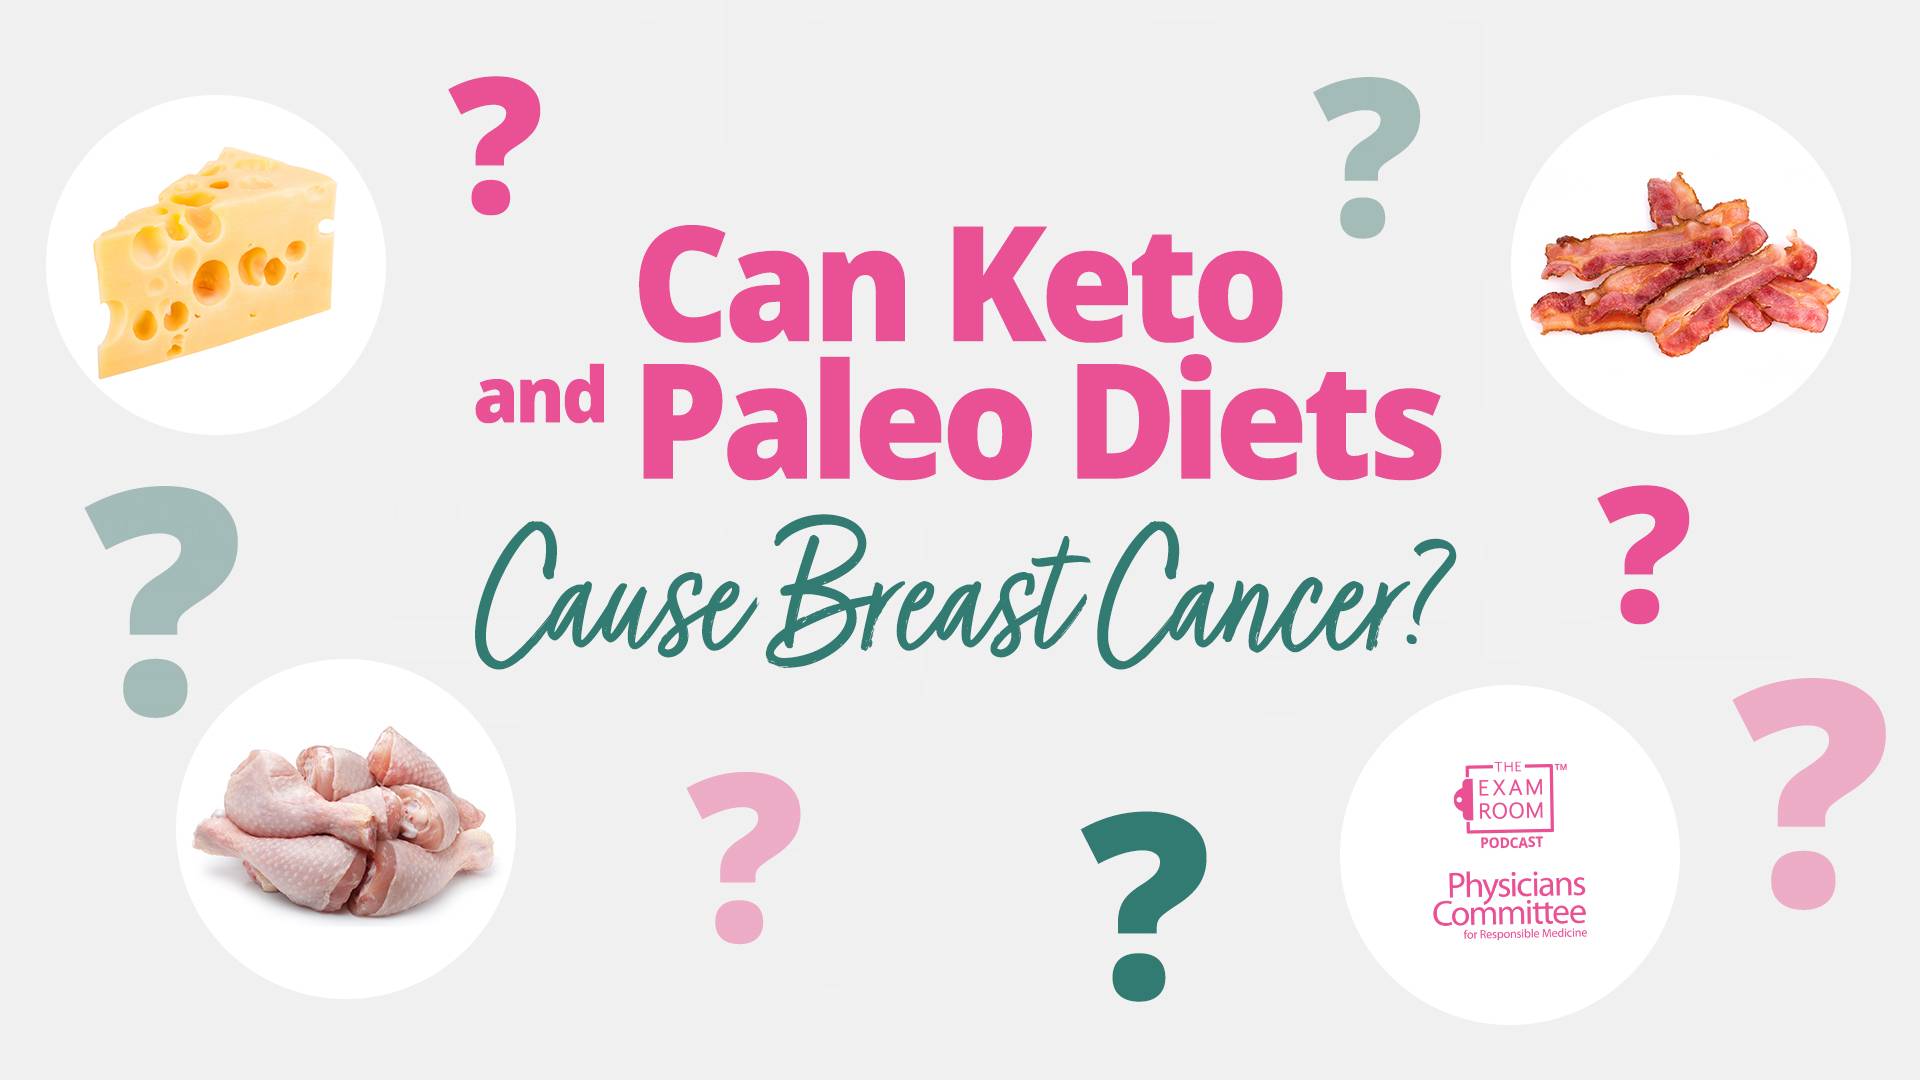 Can the Keto and Paleo Diets Cause Breast Cancer?